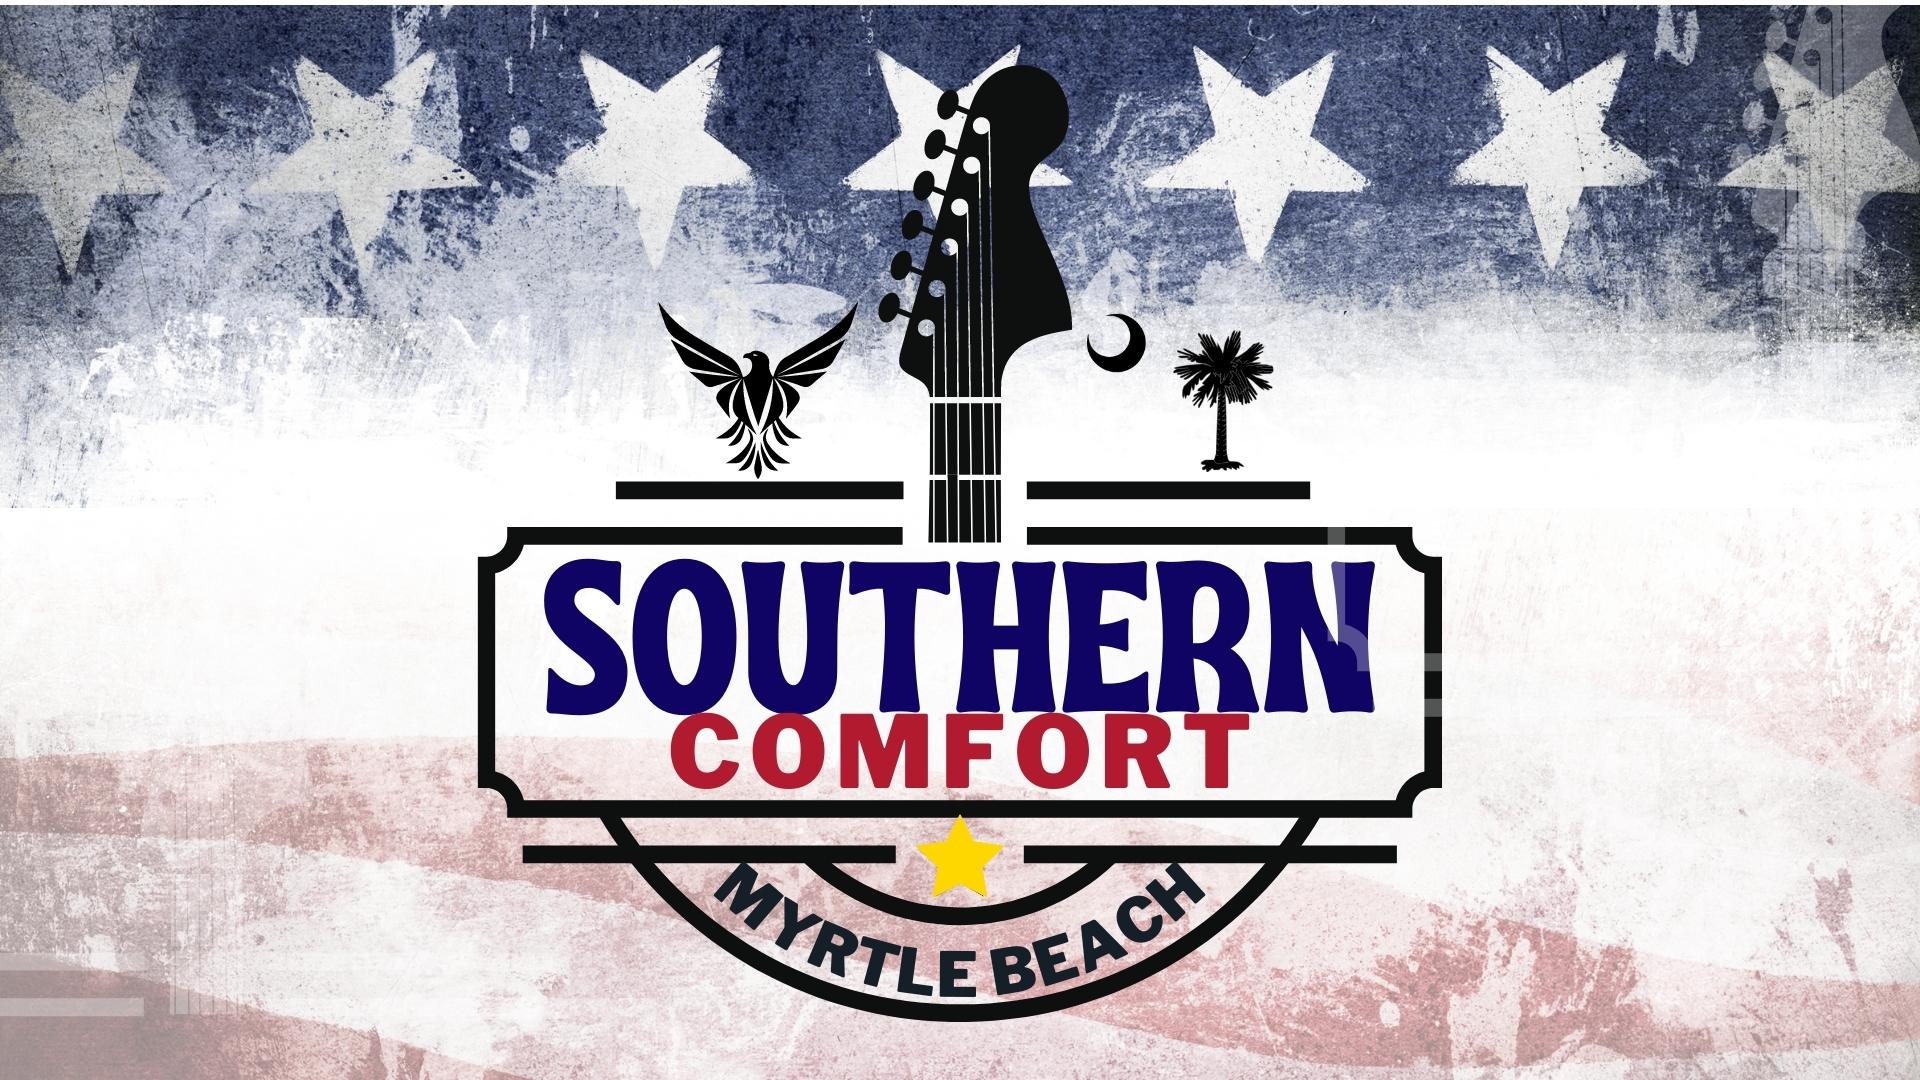 Southern Comfort Myrtle Beach